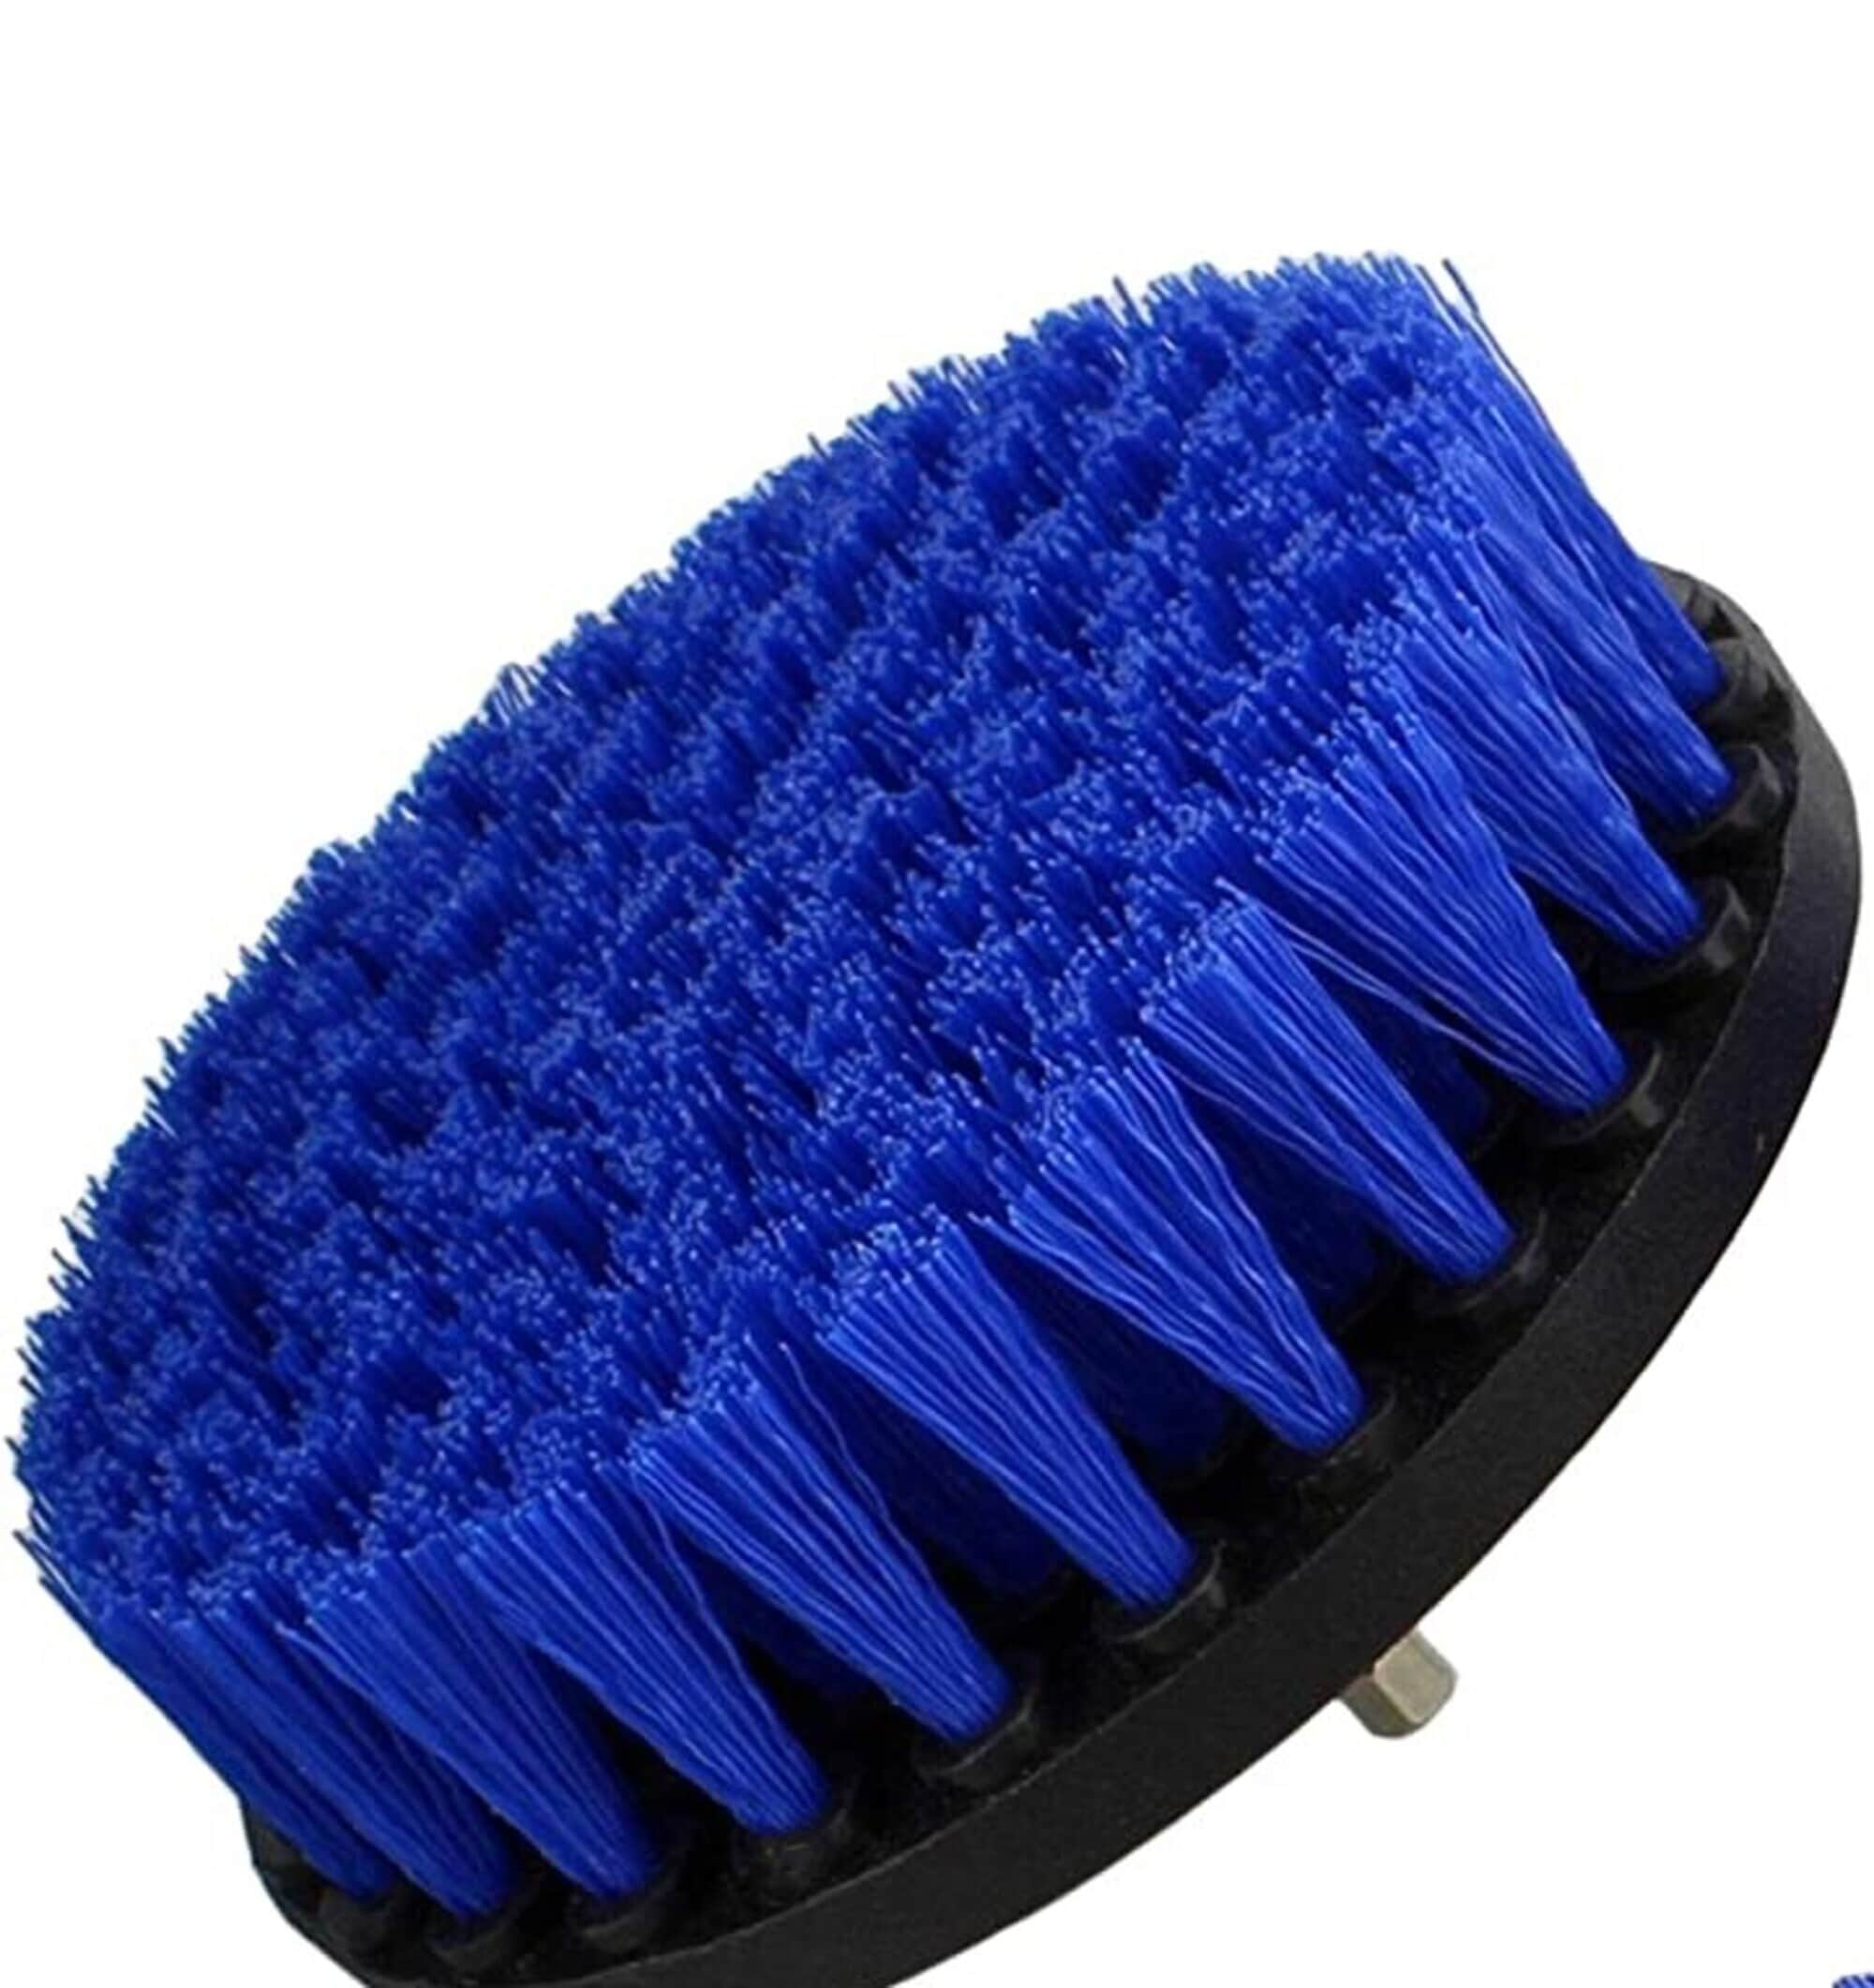 Diamond Shine 3.5 Corner Brush with 6 Extended Reach Attachment